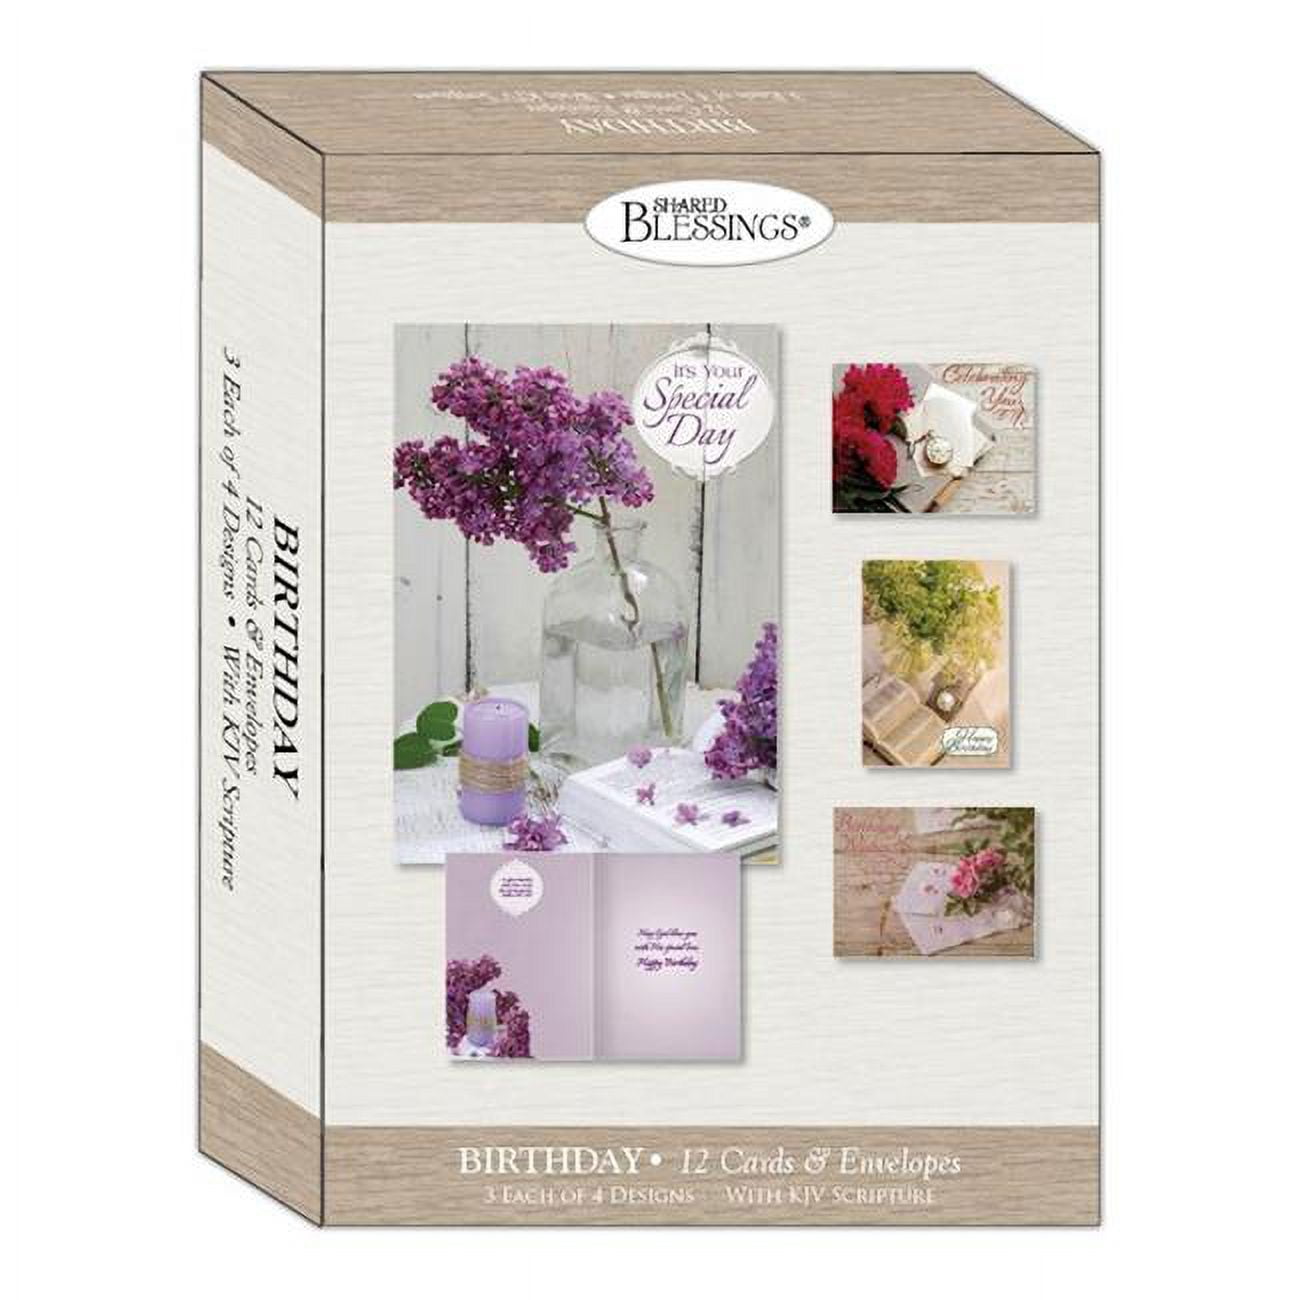 Picture of Crown Point Graphics 309285 Floral Moments Birthday Shared Blessings Boxed Card - Box of 12